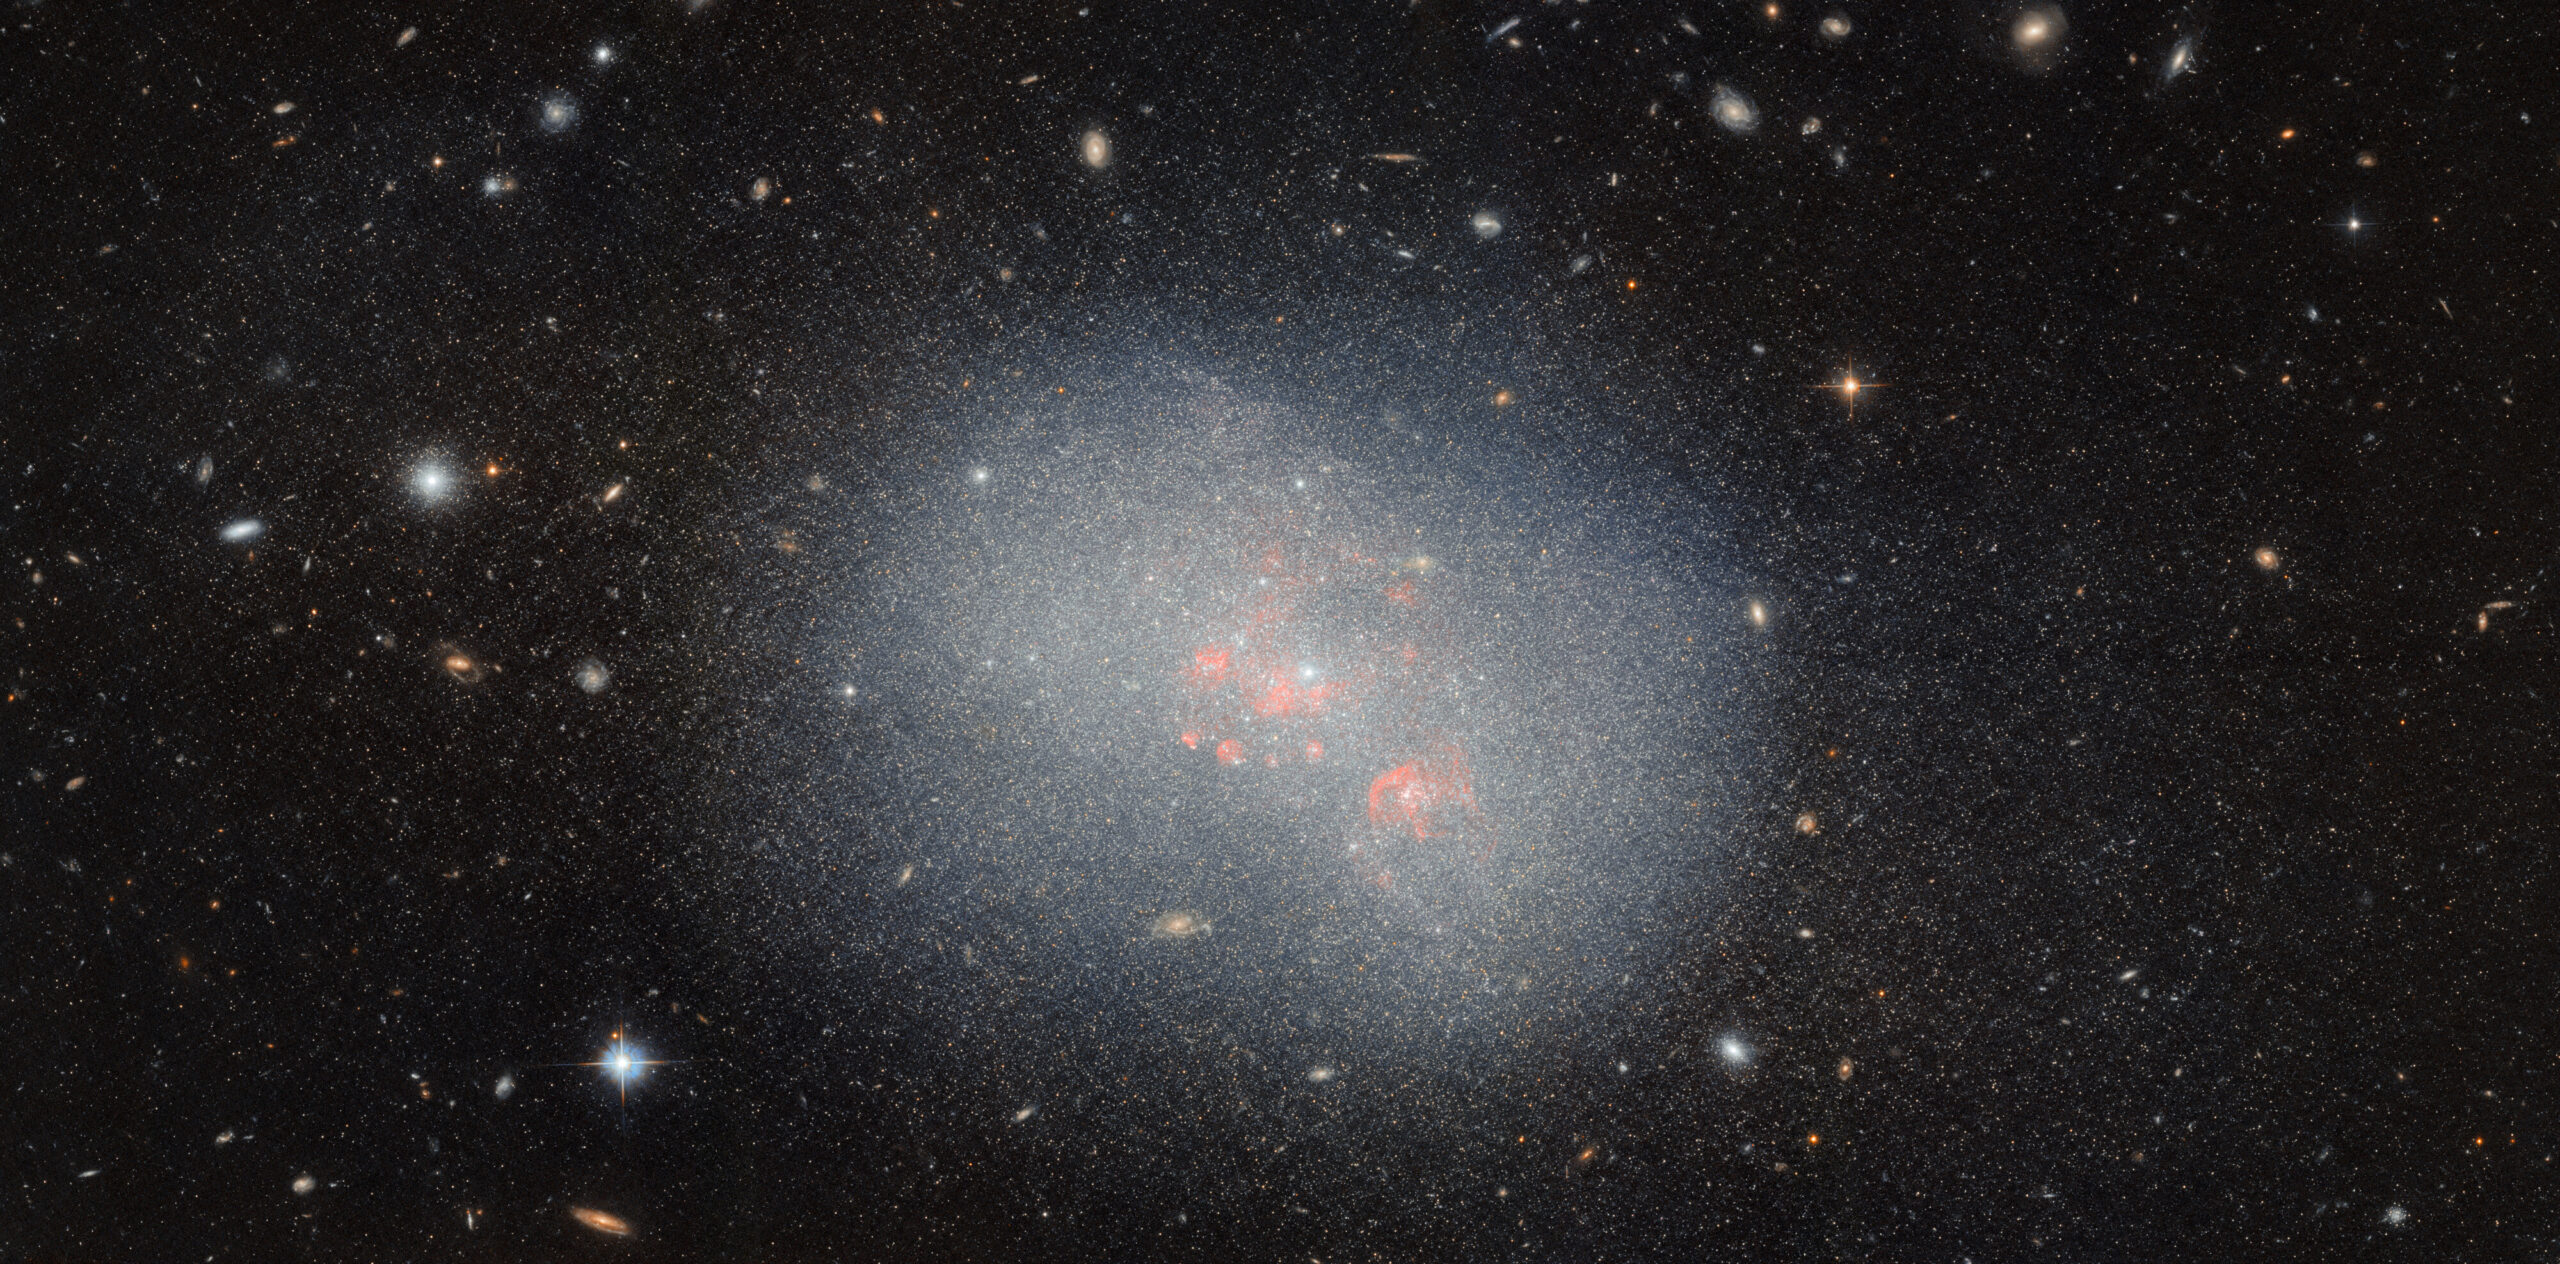 Constructor galaxy: Hubble telescope photographs an unusual neighbor of the Milky Way